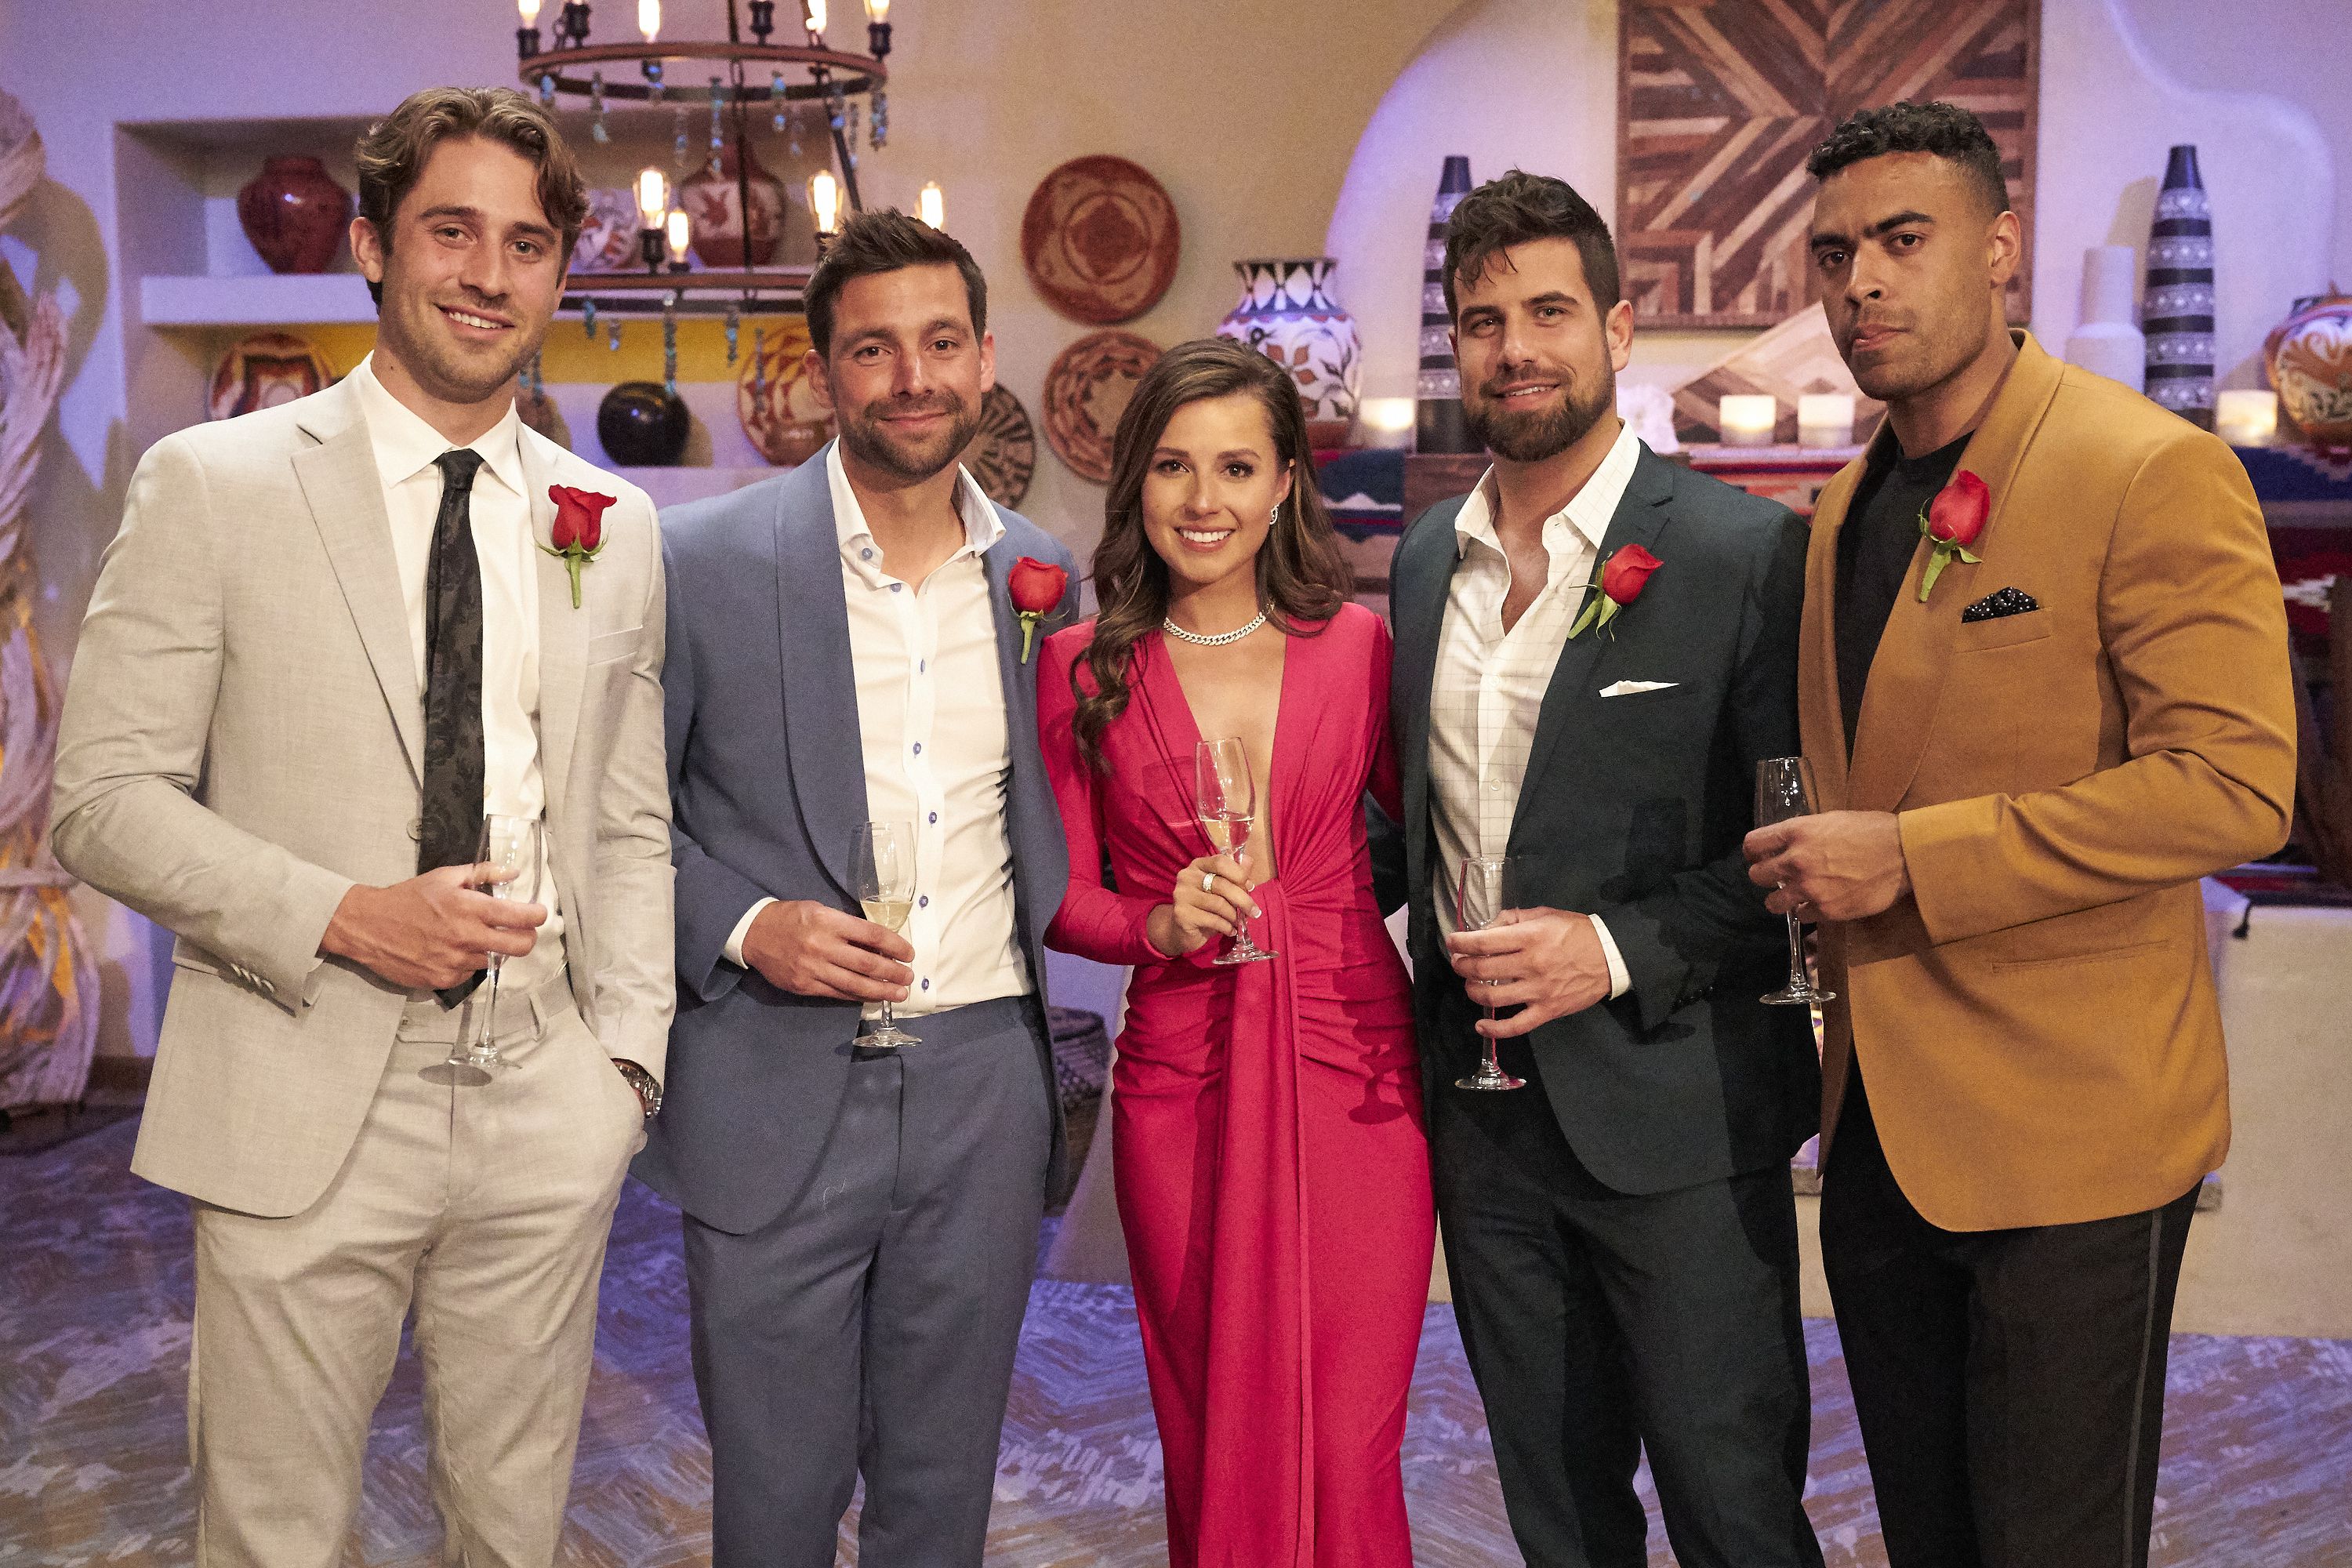 Why Michael Allio Quit Katie Thurstons Bachelorette, With Twitter Reactions pic